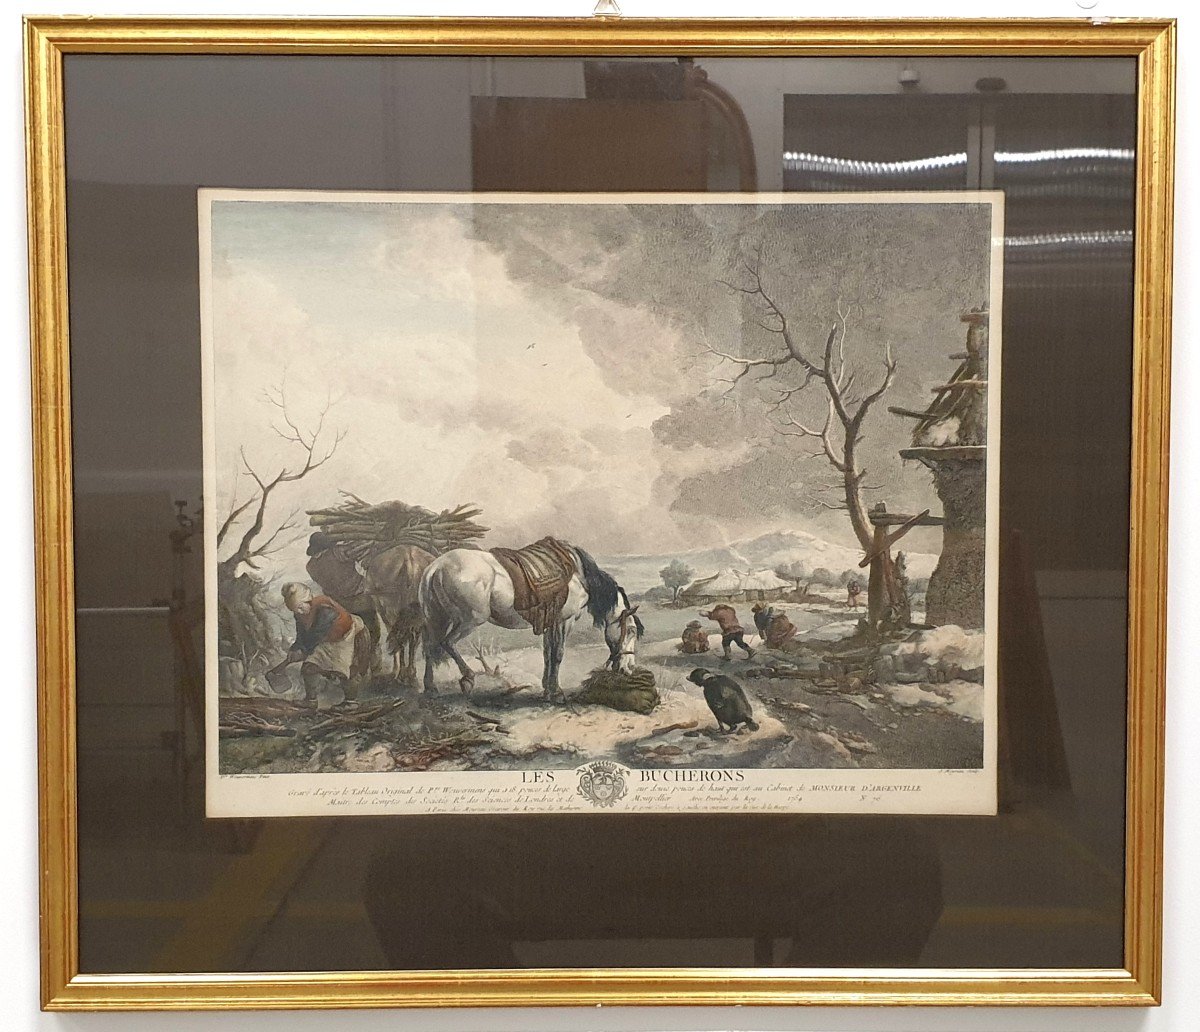 18th Century Color Engraving Philips Wouwerman 58 X 66 Cm